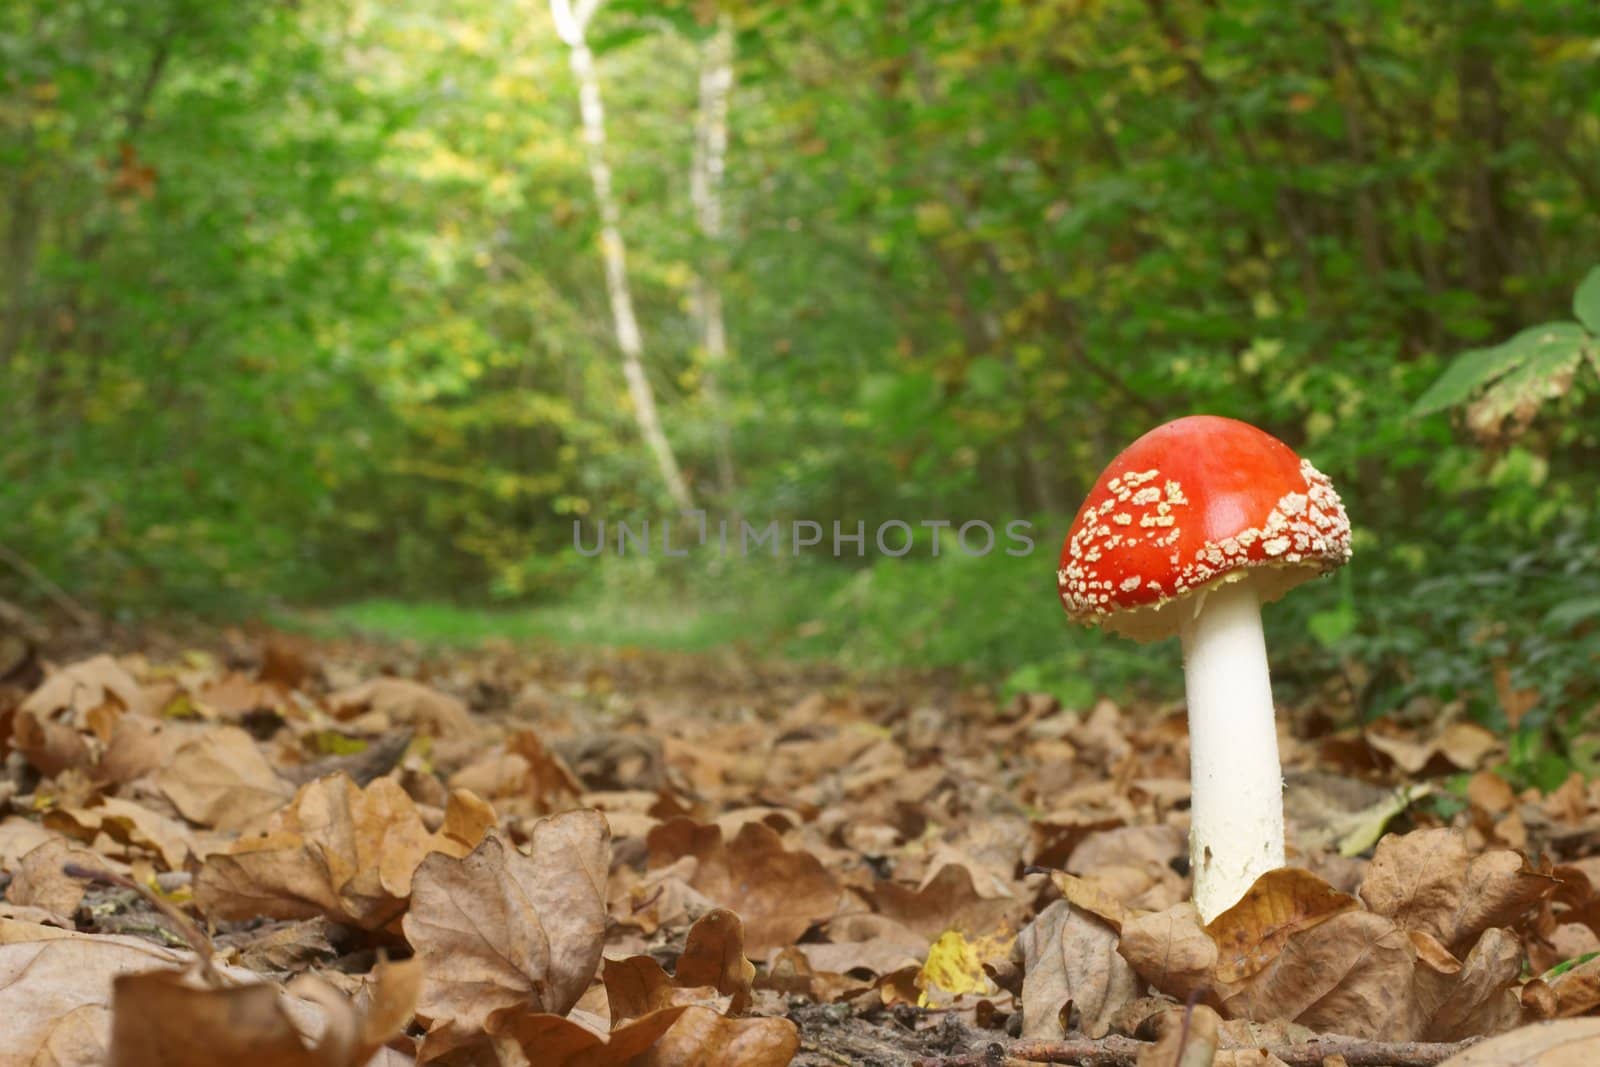 A red mushroom in green forest